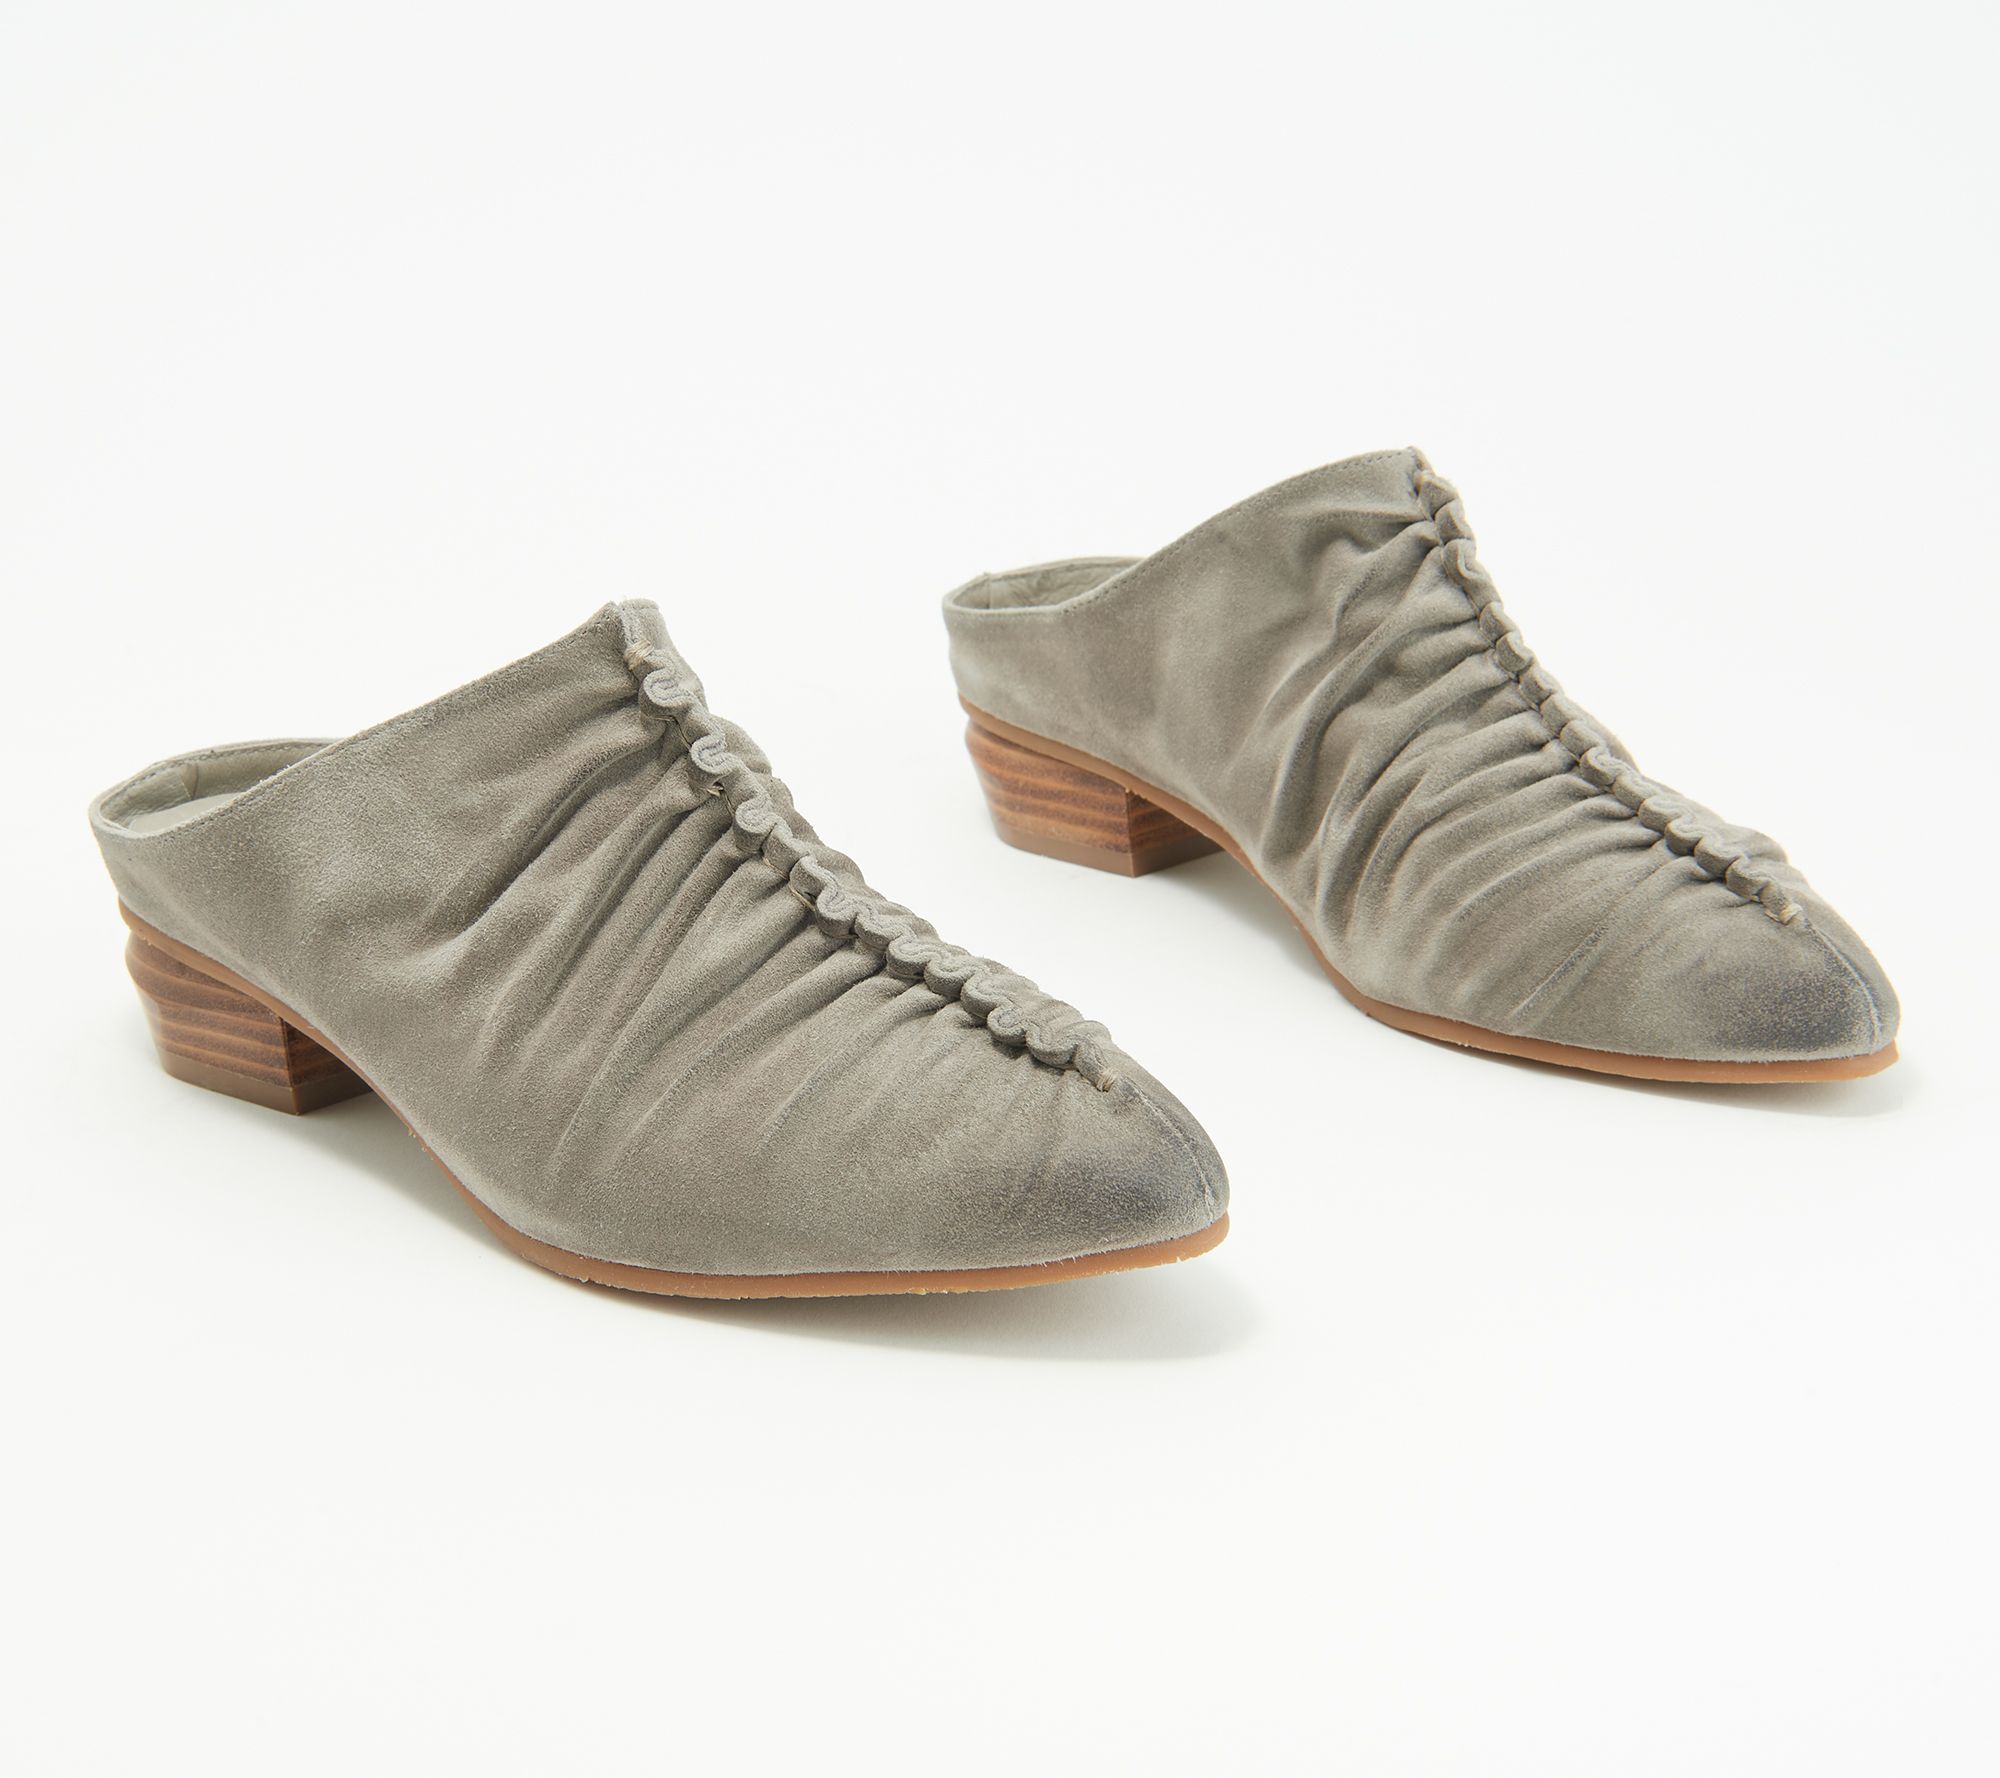 Antelope Suede Ruched Mules - Liselle - QVC.com